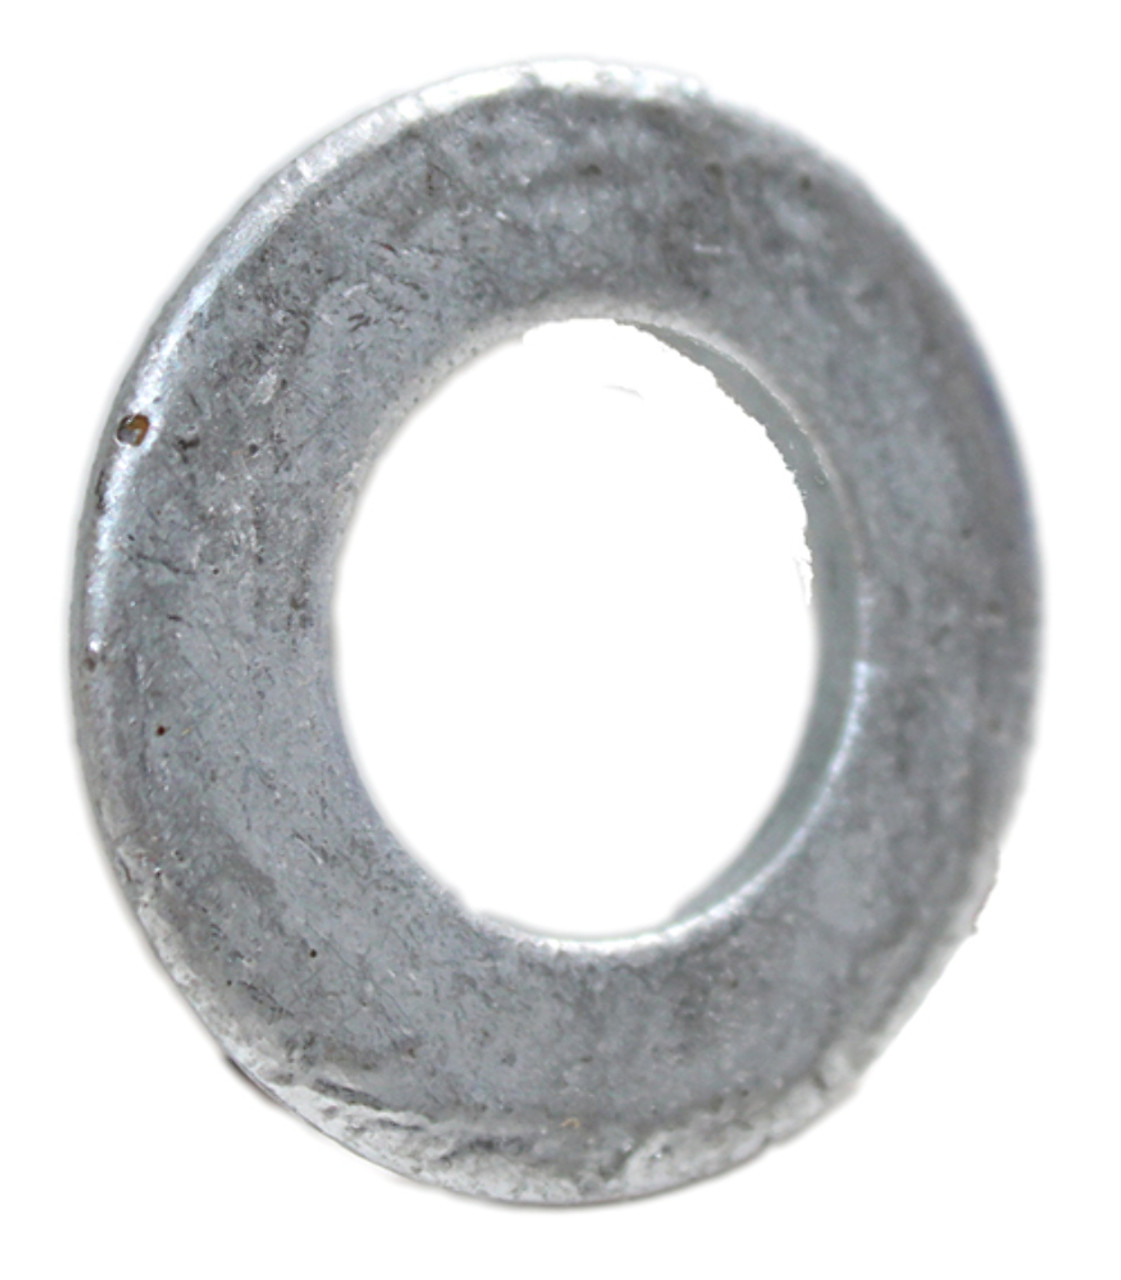 3/4 x 1-1/2 SAE Flat Washer Steel Hot Dipped Galvanized